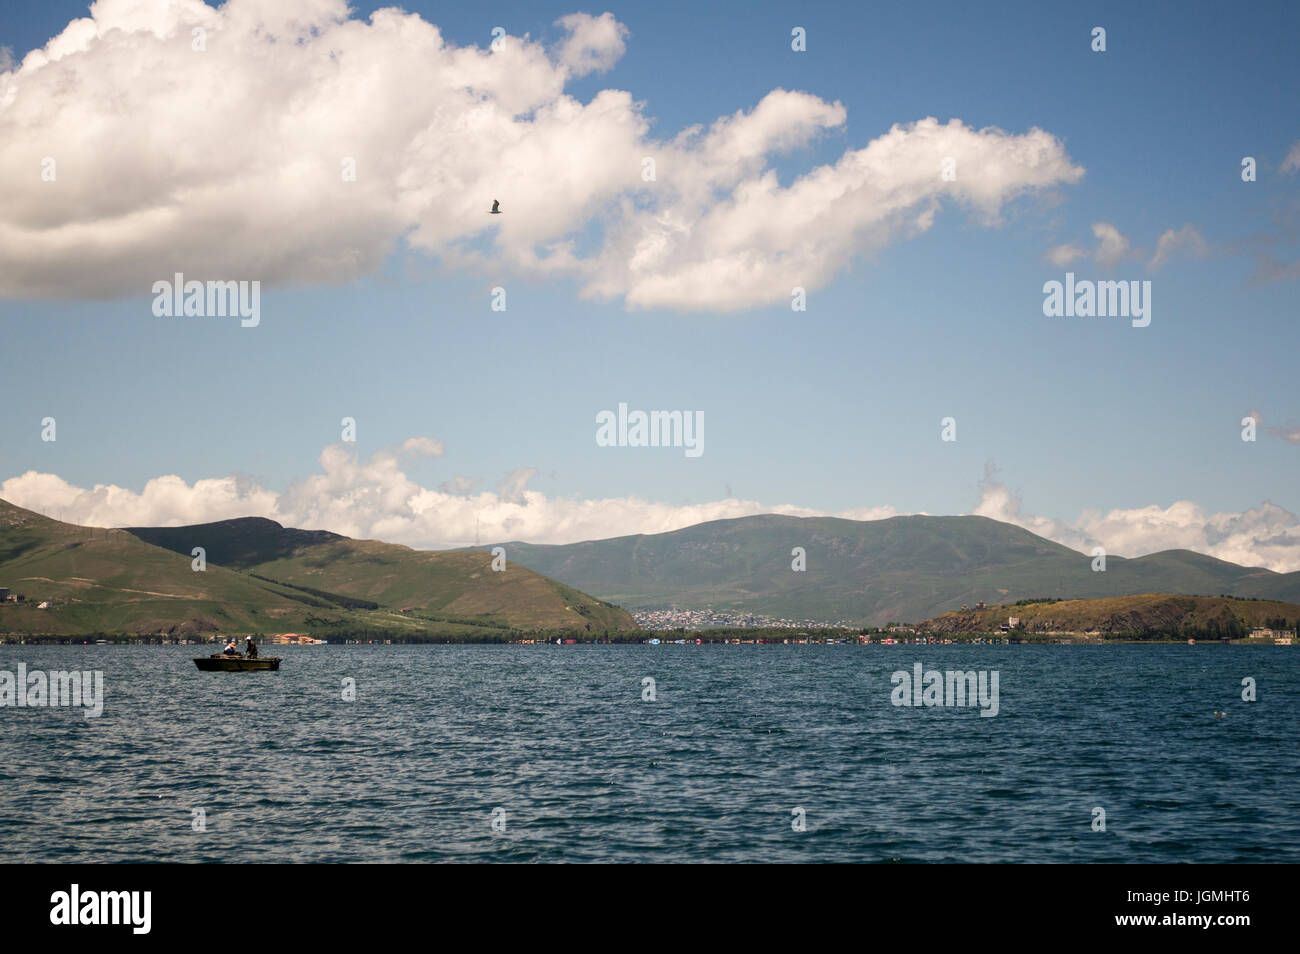 Fishing boat on Lake Sevan in Armenia with clouds and mountains. Stock Photo